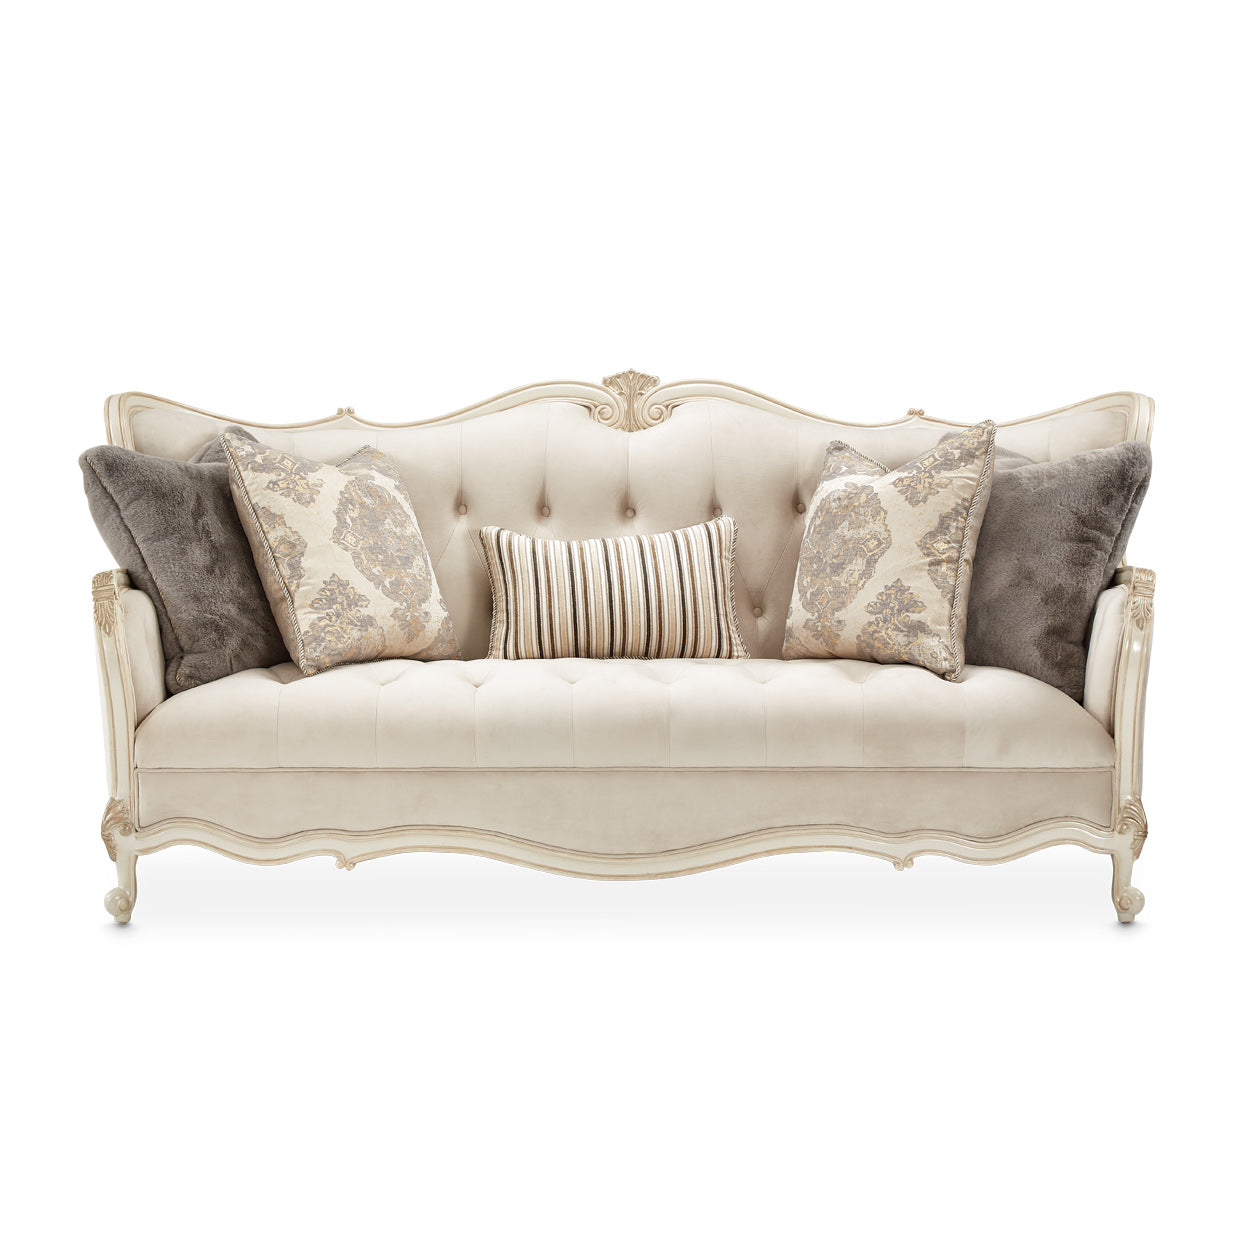 Lavelle-Classic Pearl, Sofa, French regal influence, scallop-shaped pieces, collection, classic French look, chic twist, hip, couture feel, upholstered pieces, Lavelle collection, class, style, Beveled inlaid glass, plush upholstery, generous storage, display spaces, antique hardware, genuine Swarovski crystal accents, design, detail, Upholstered, dream art, michael amini